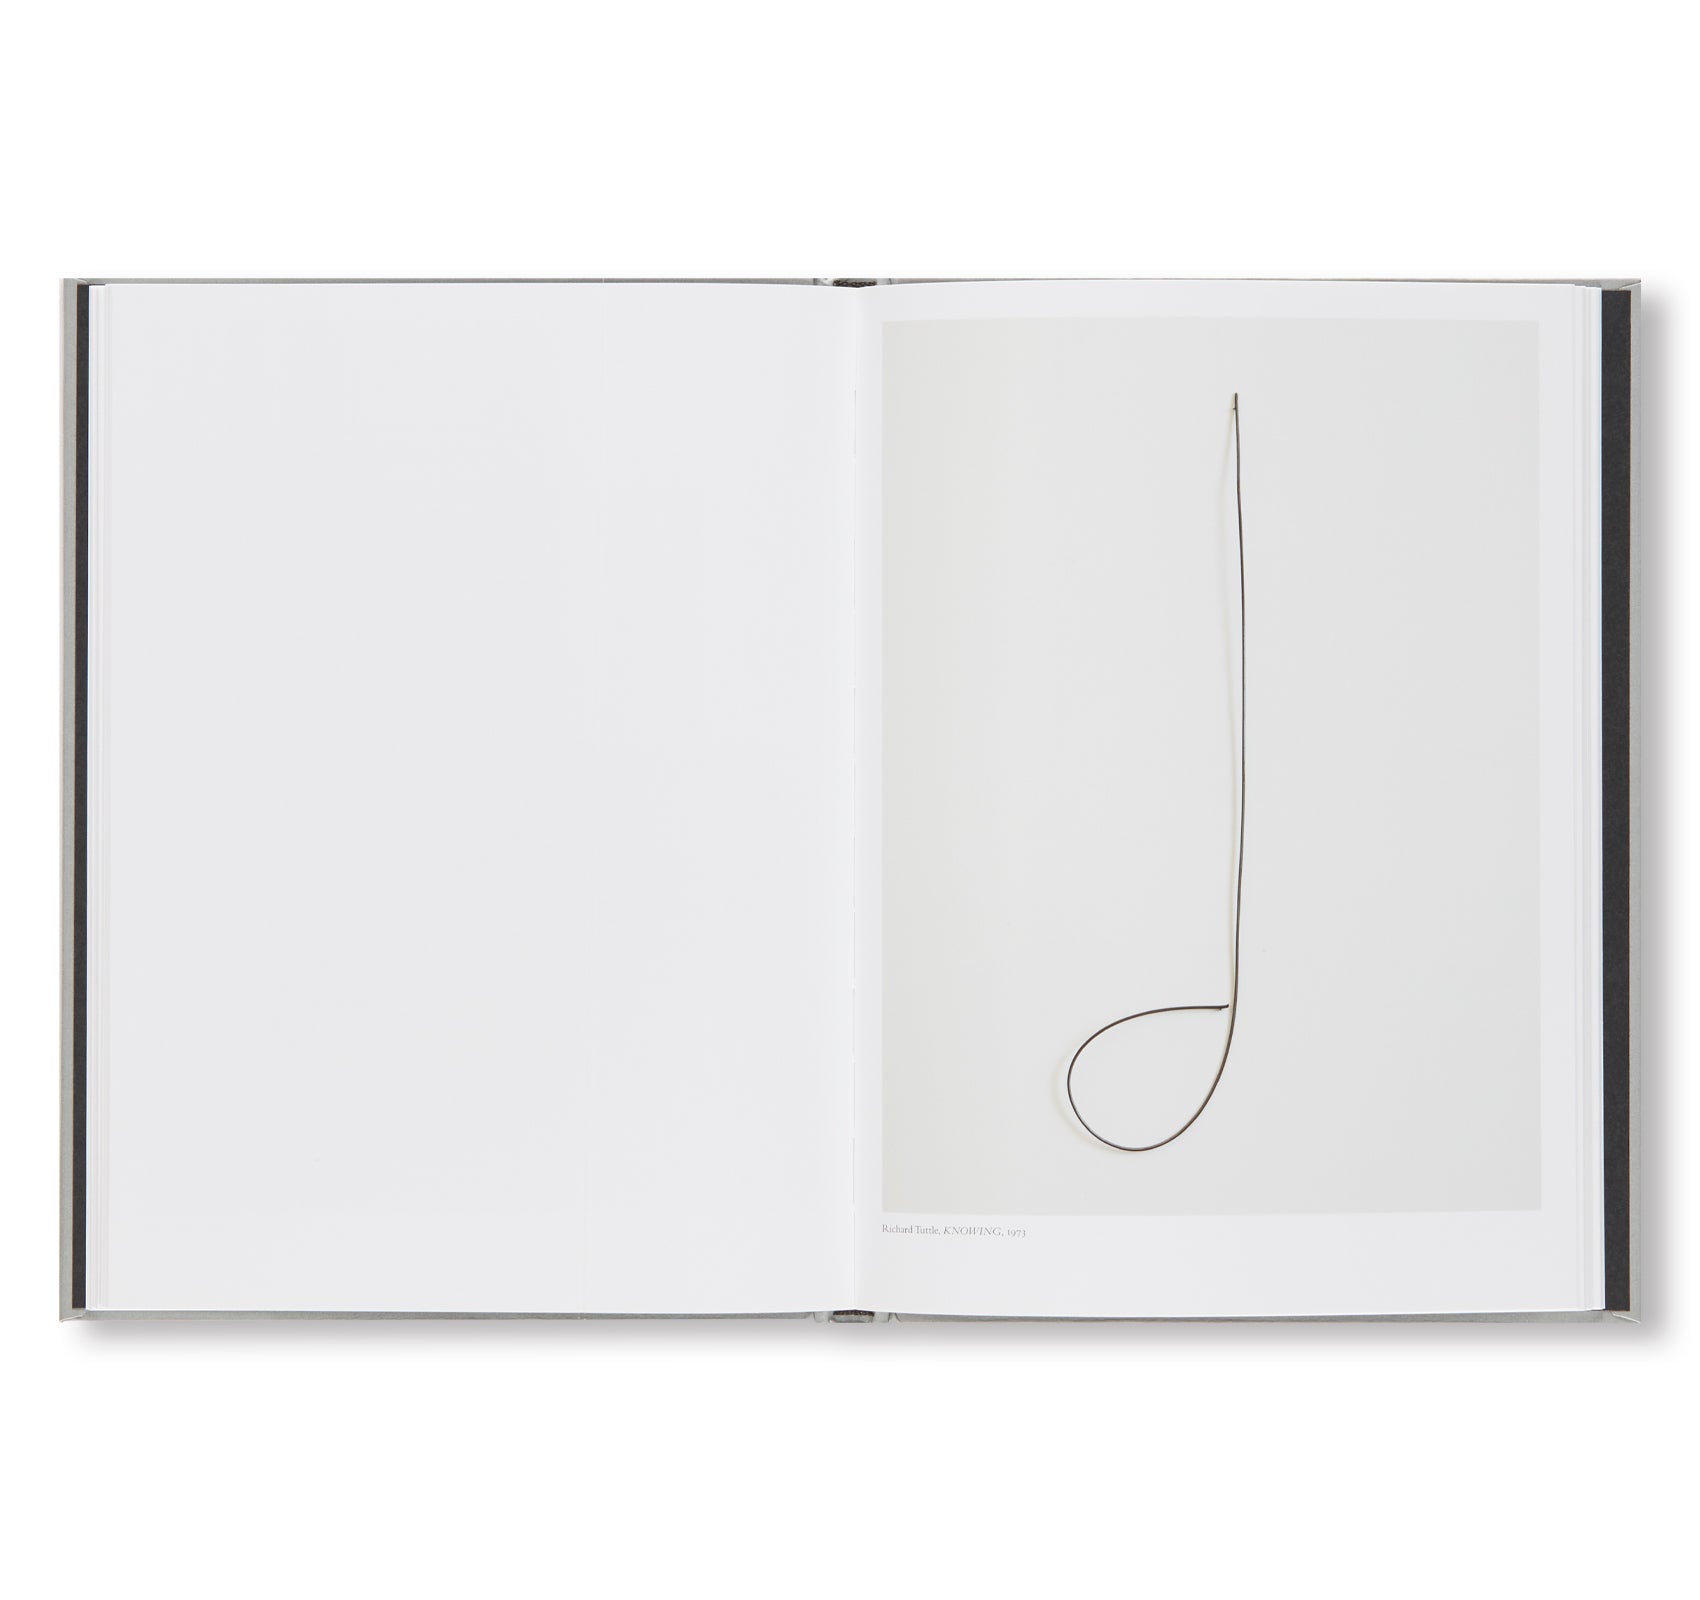 MINIMAL ART: FROM THE MARZONA COLLECTION